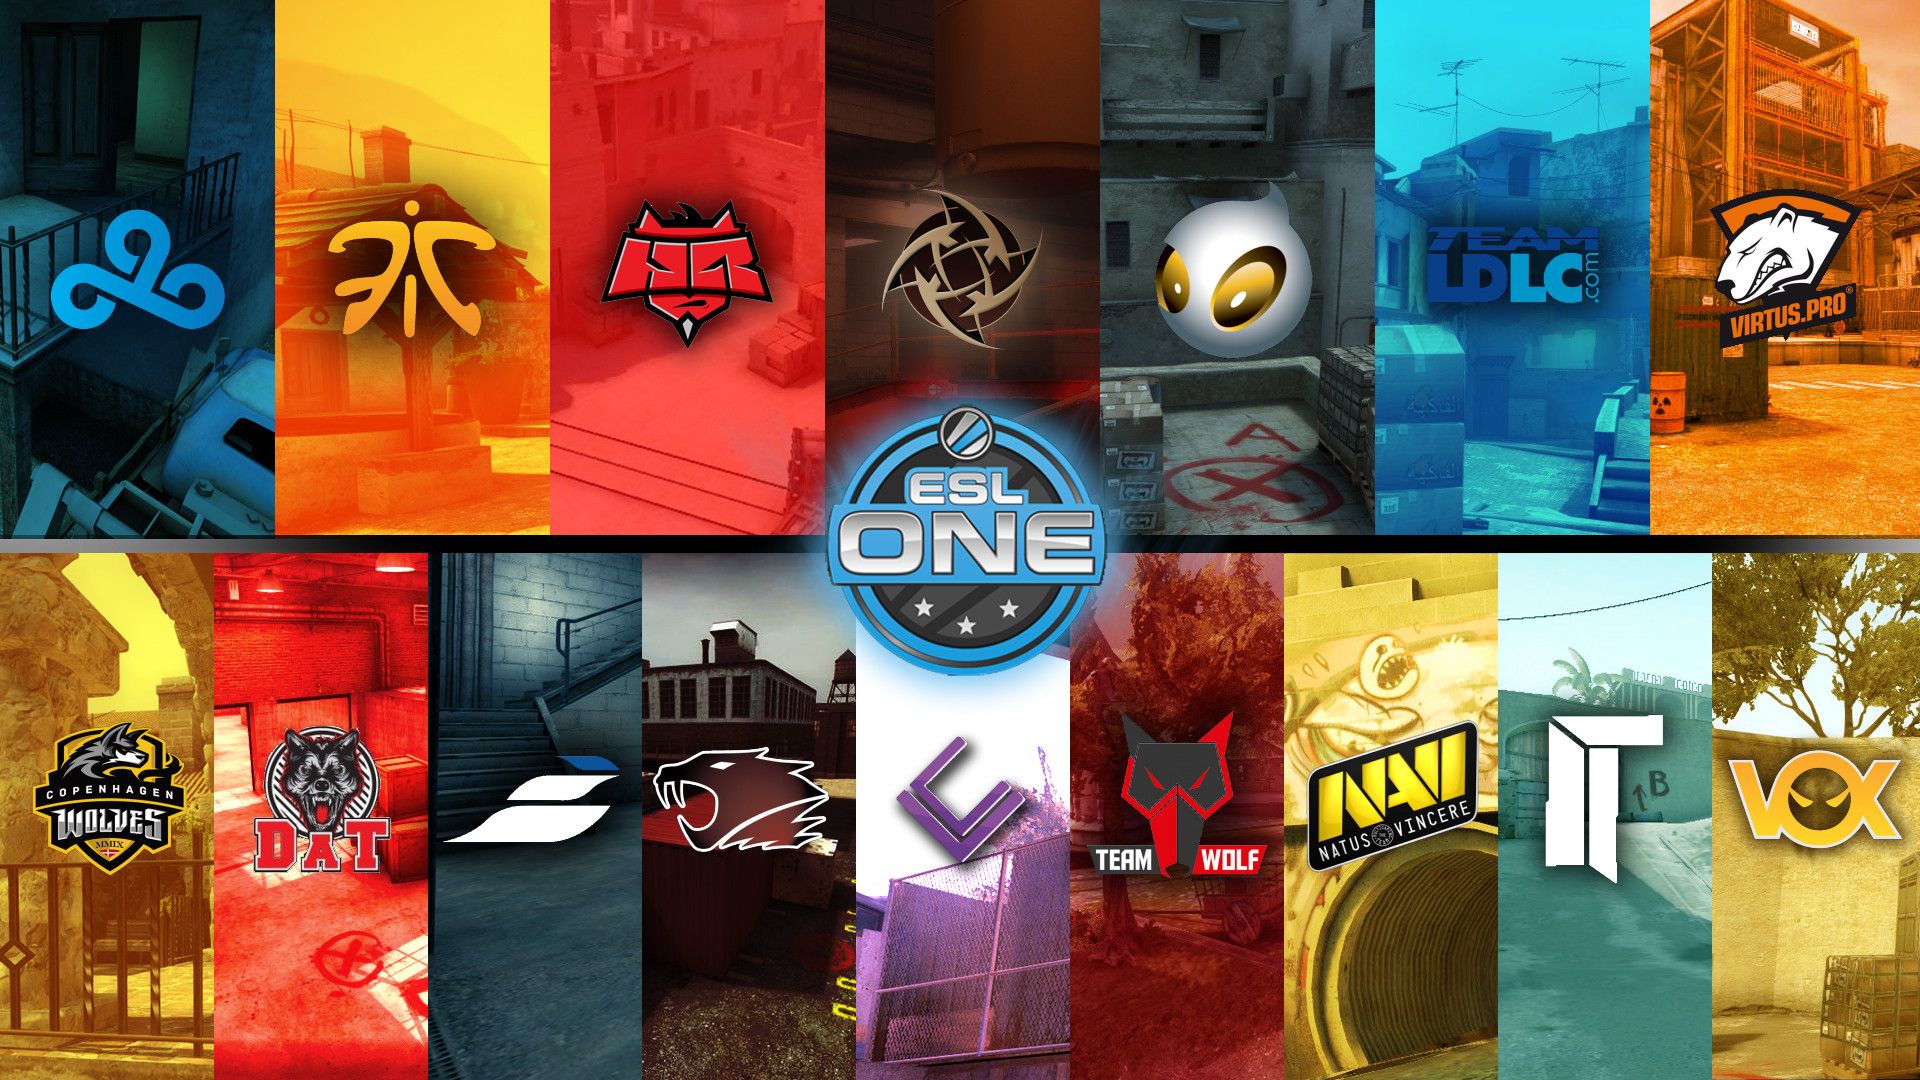 ESL ONE Cologne Wallpaper [Fixed] 1920x1080